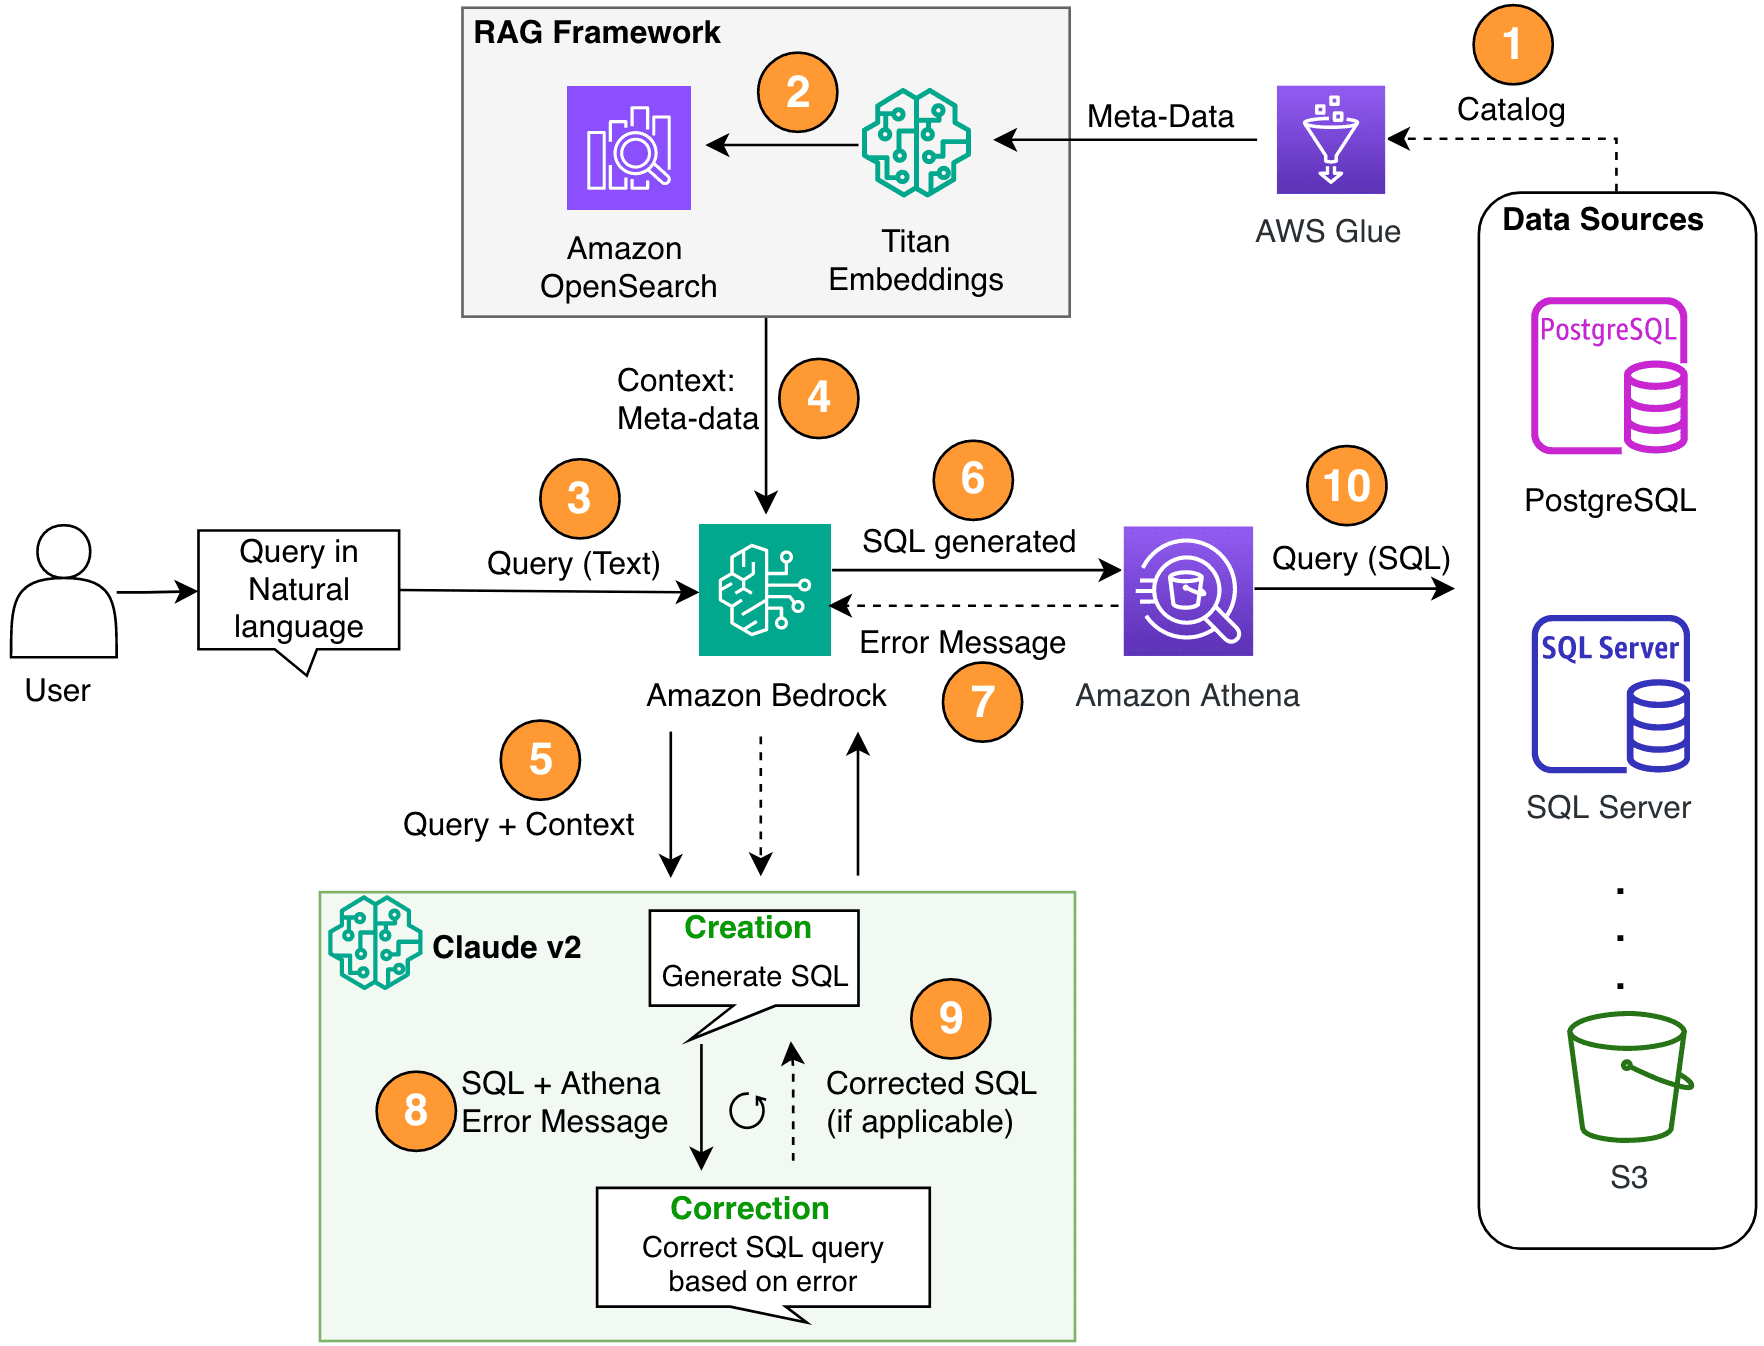 The solution architecture and the process flow is shown.